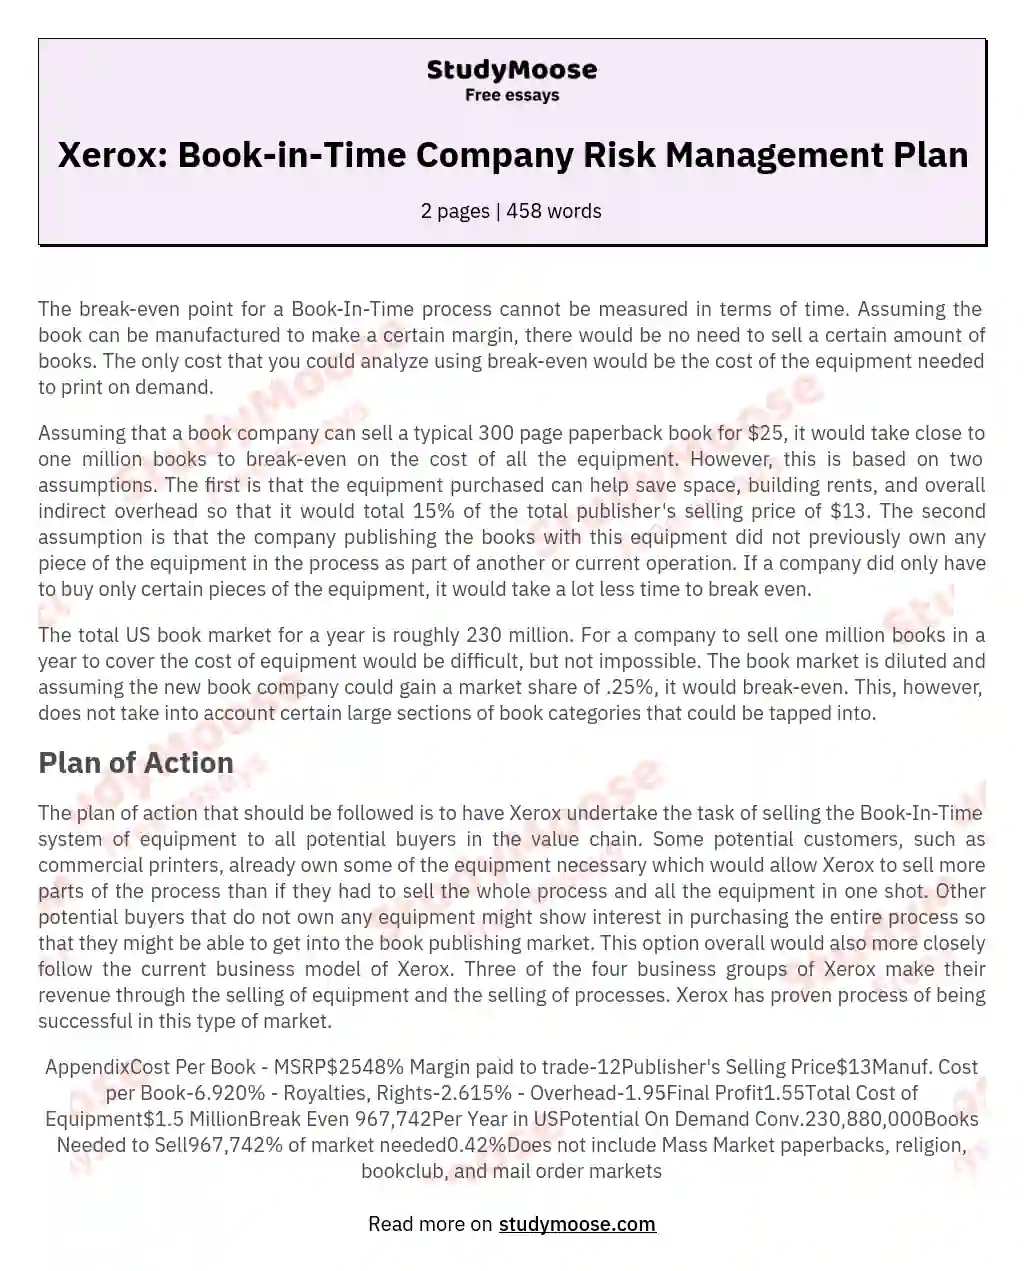 Xerox: Book-in-Time Company Risk Management Plan essay